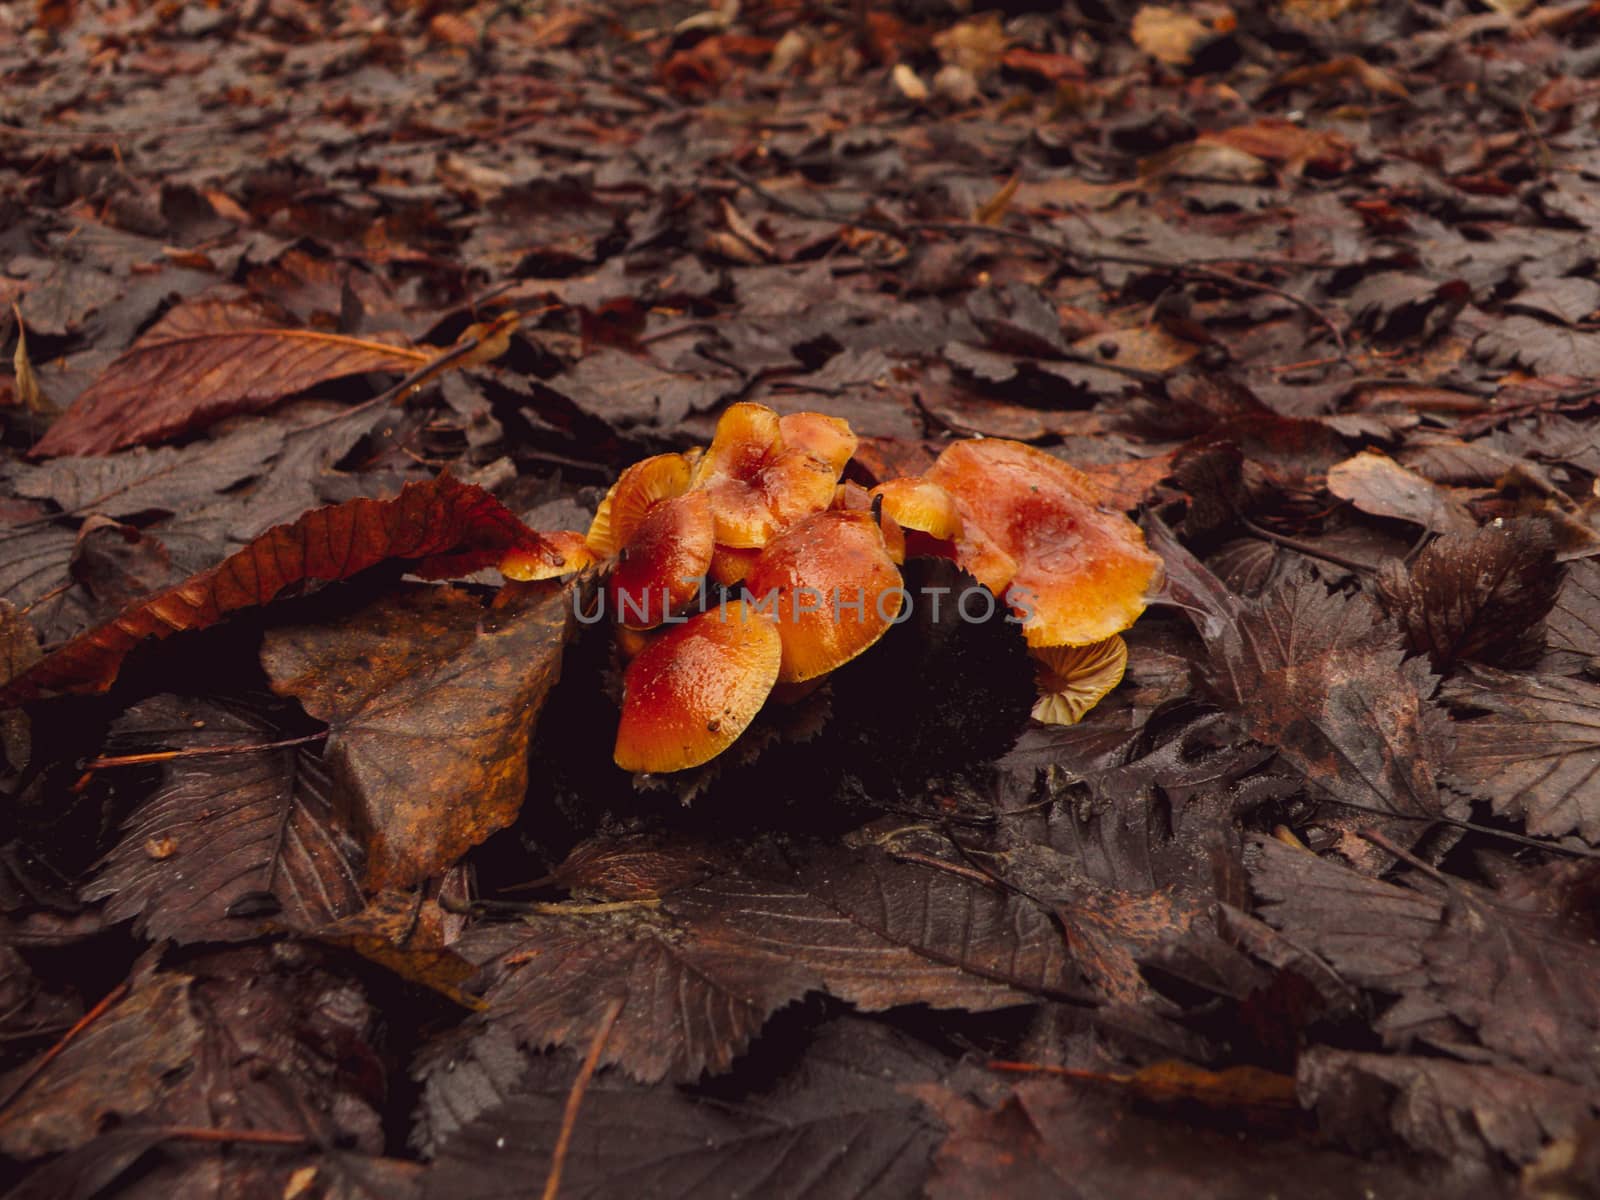 Group of the honey mushrooms in the forest brown foliage by mtx